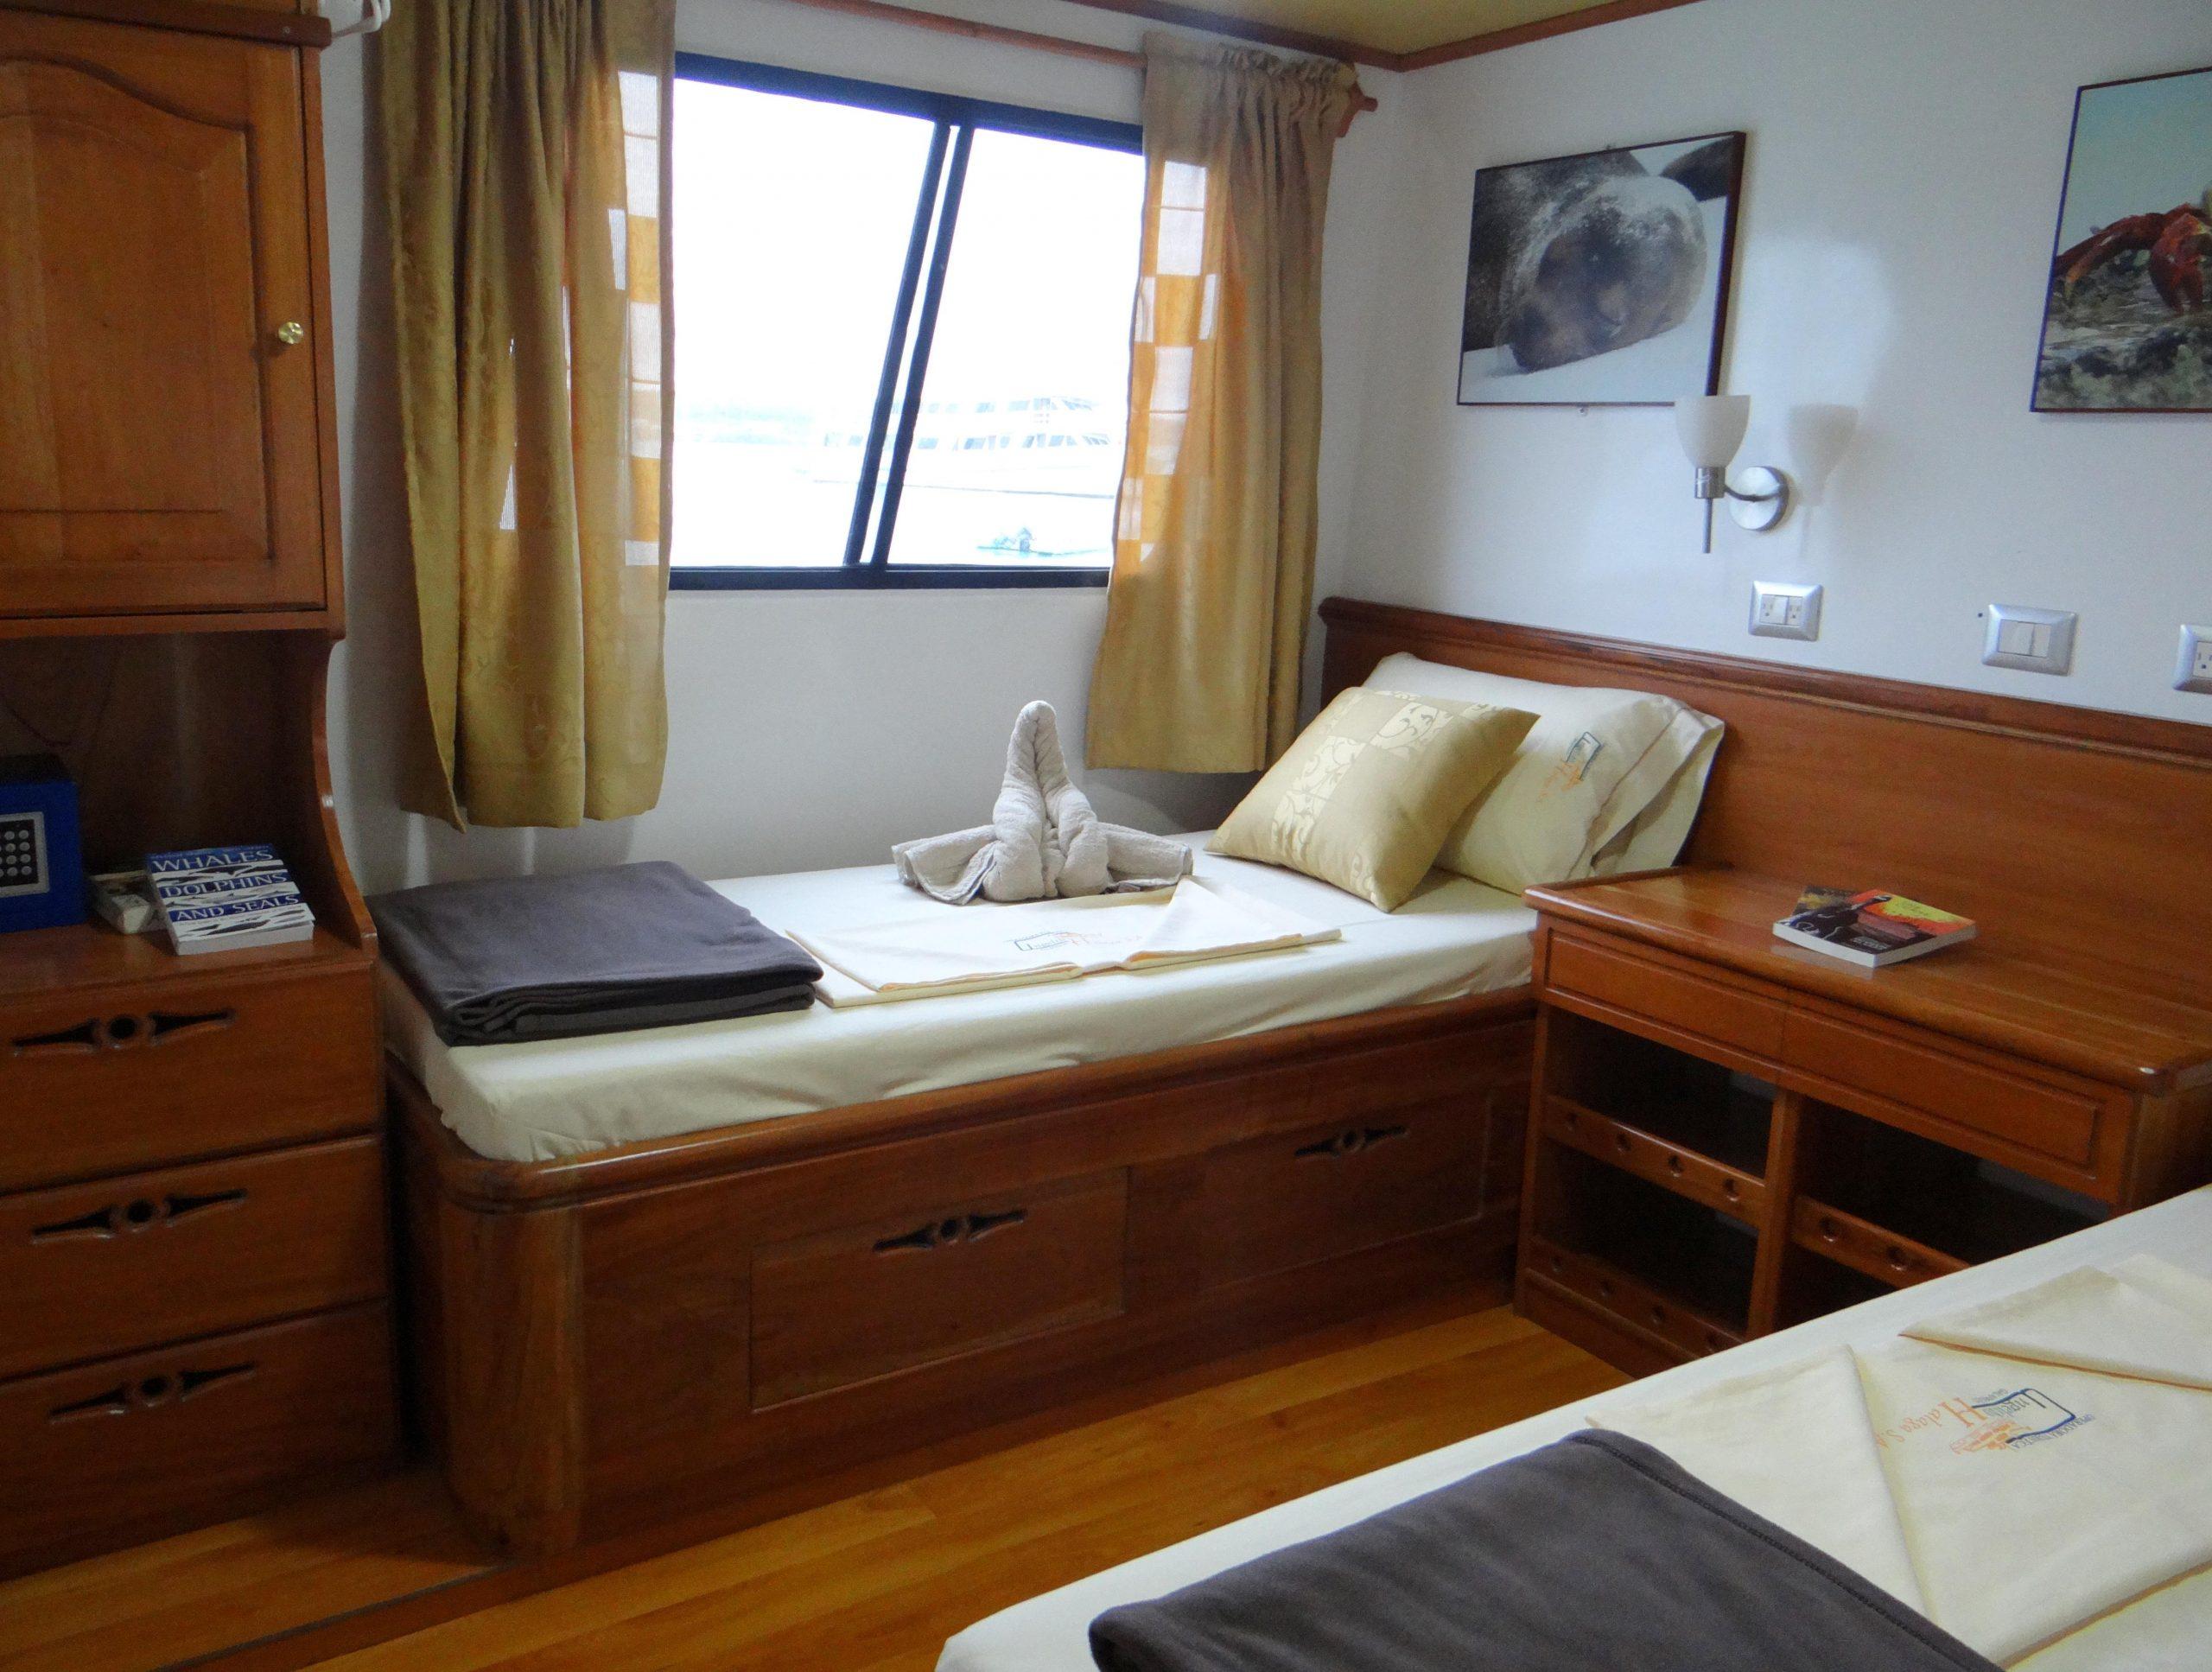 Personal cabin on the Angelito cruise